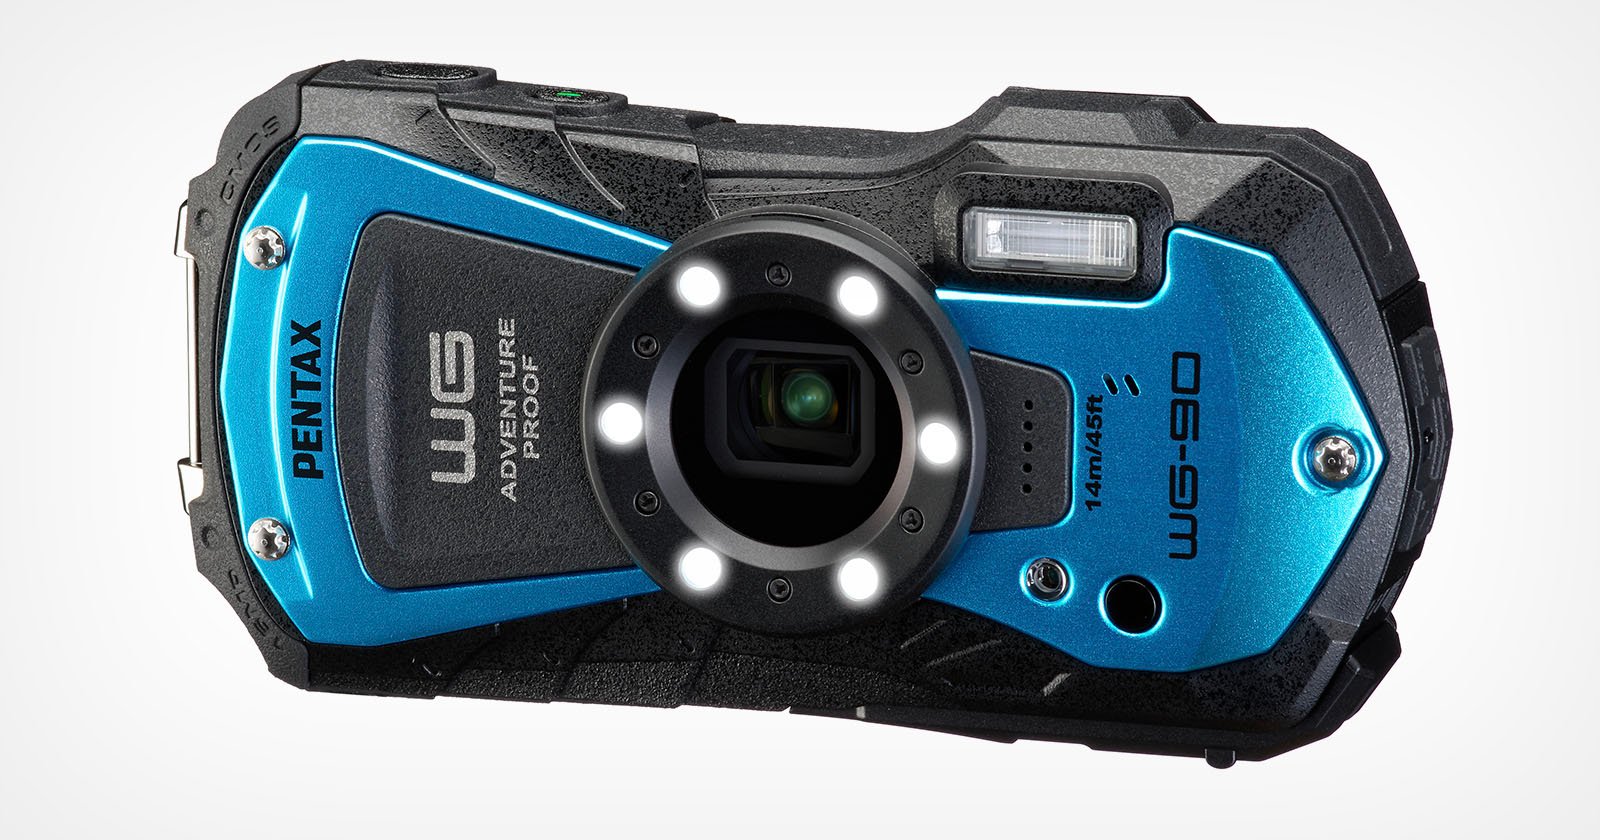 Waterproof Pentax WG-90 Has New Branding and Color But Identical Specs